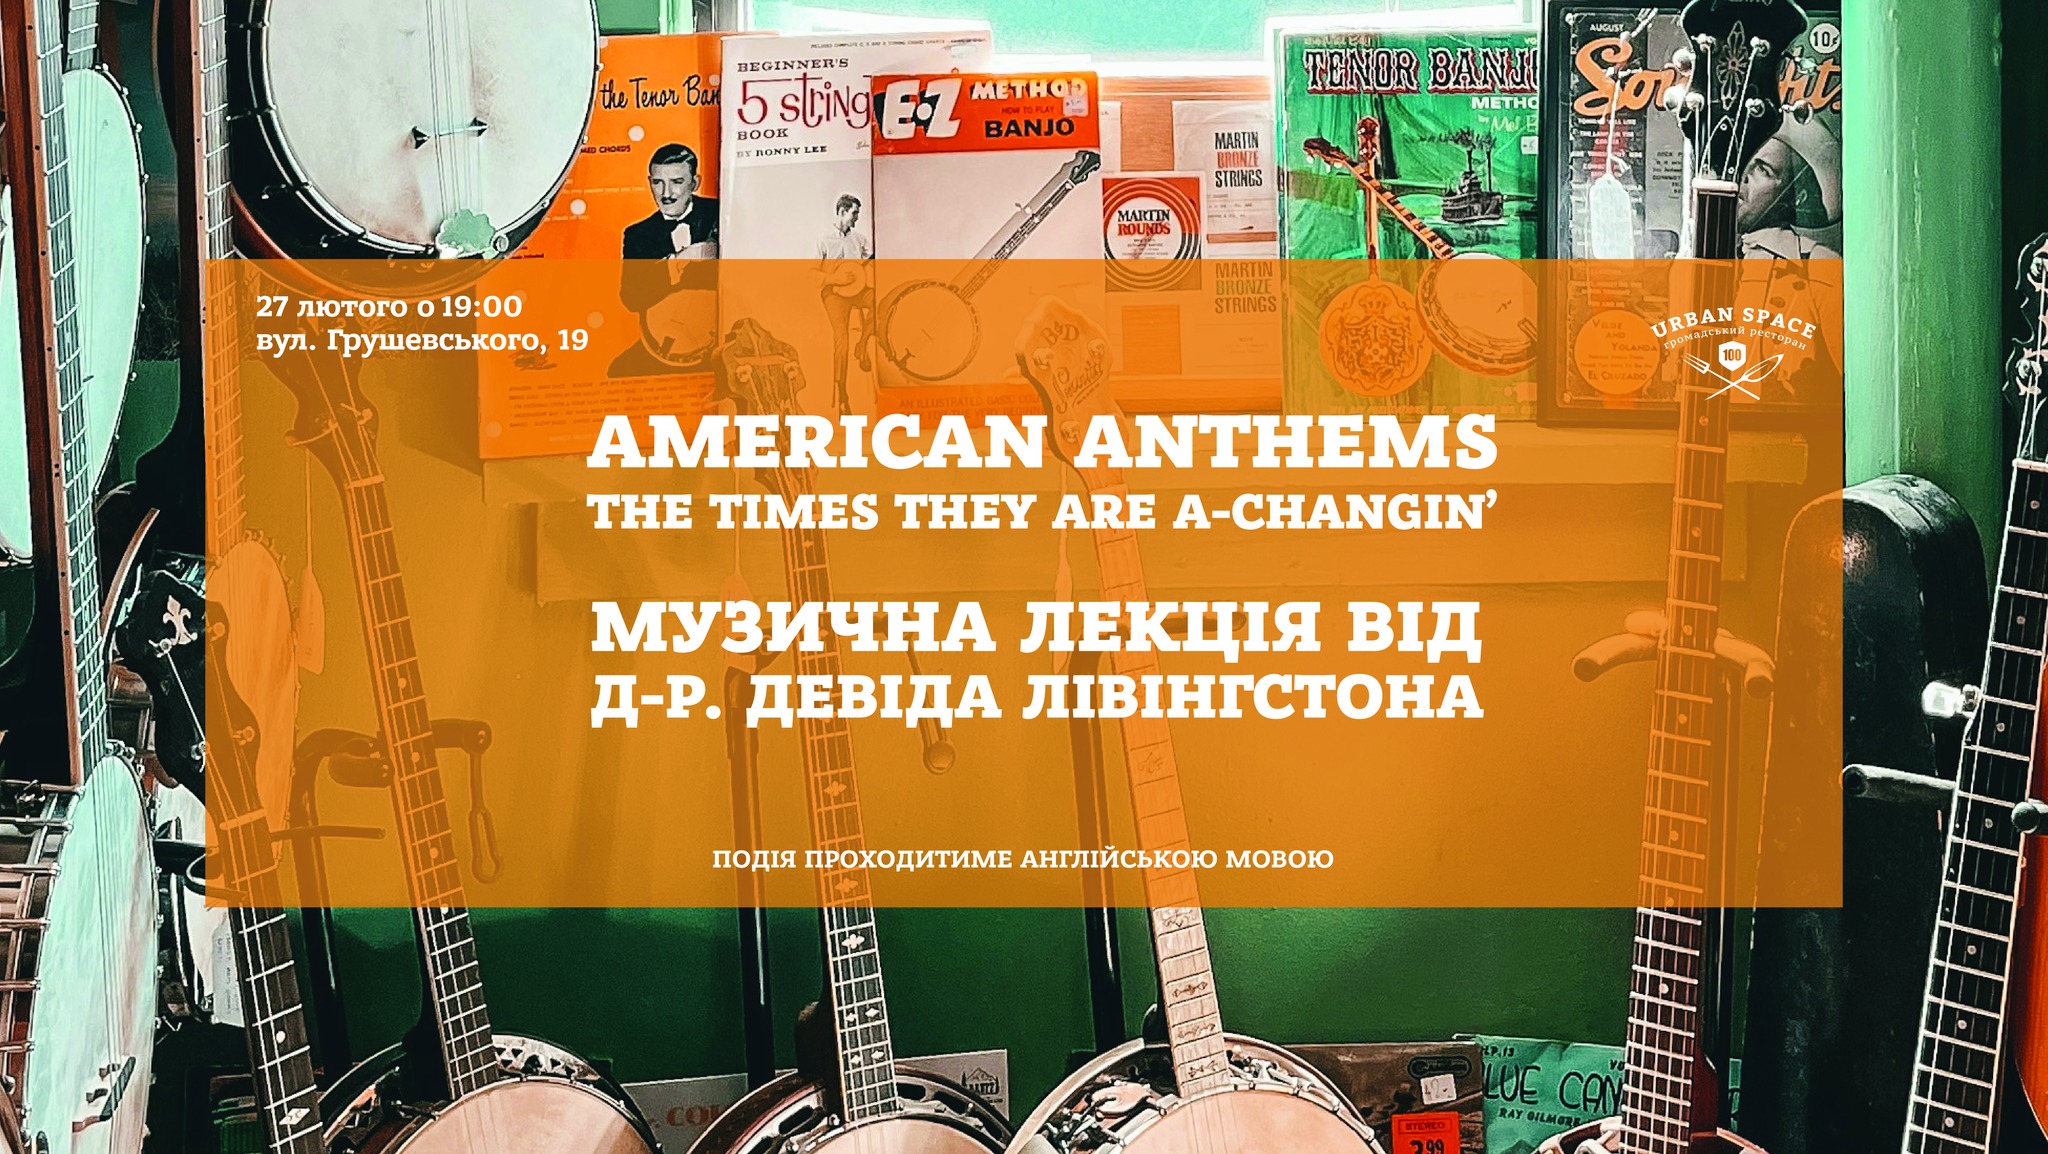 American Anthems: The Times They Are A-Changin’ (musical talk)